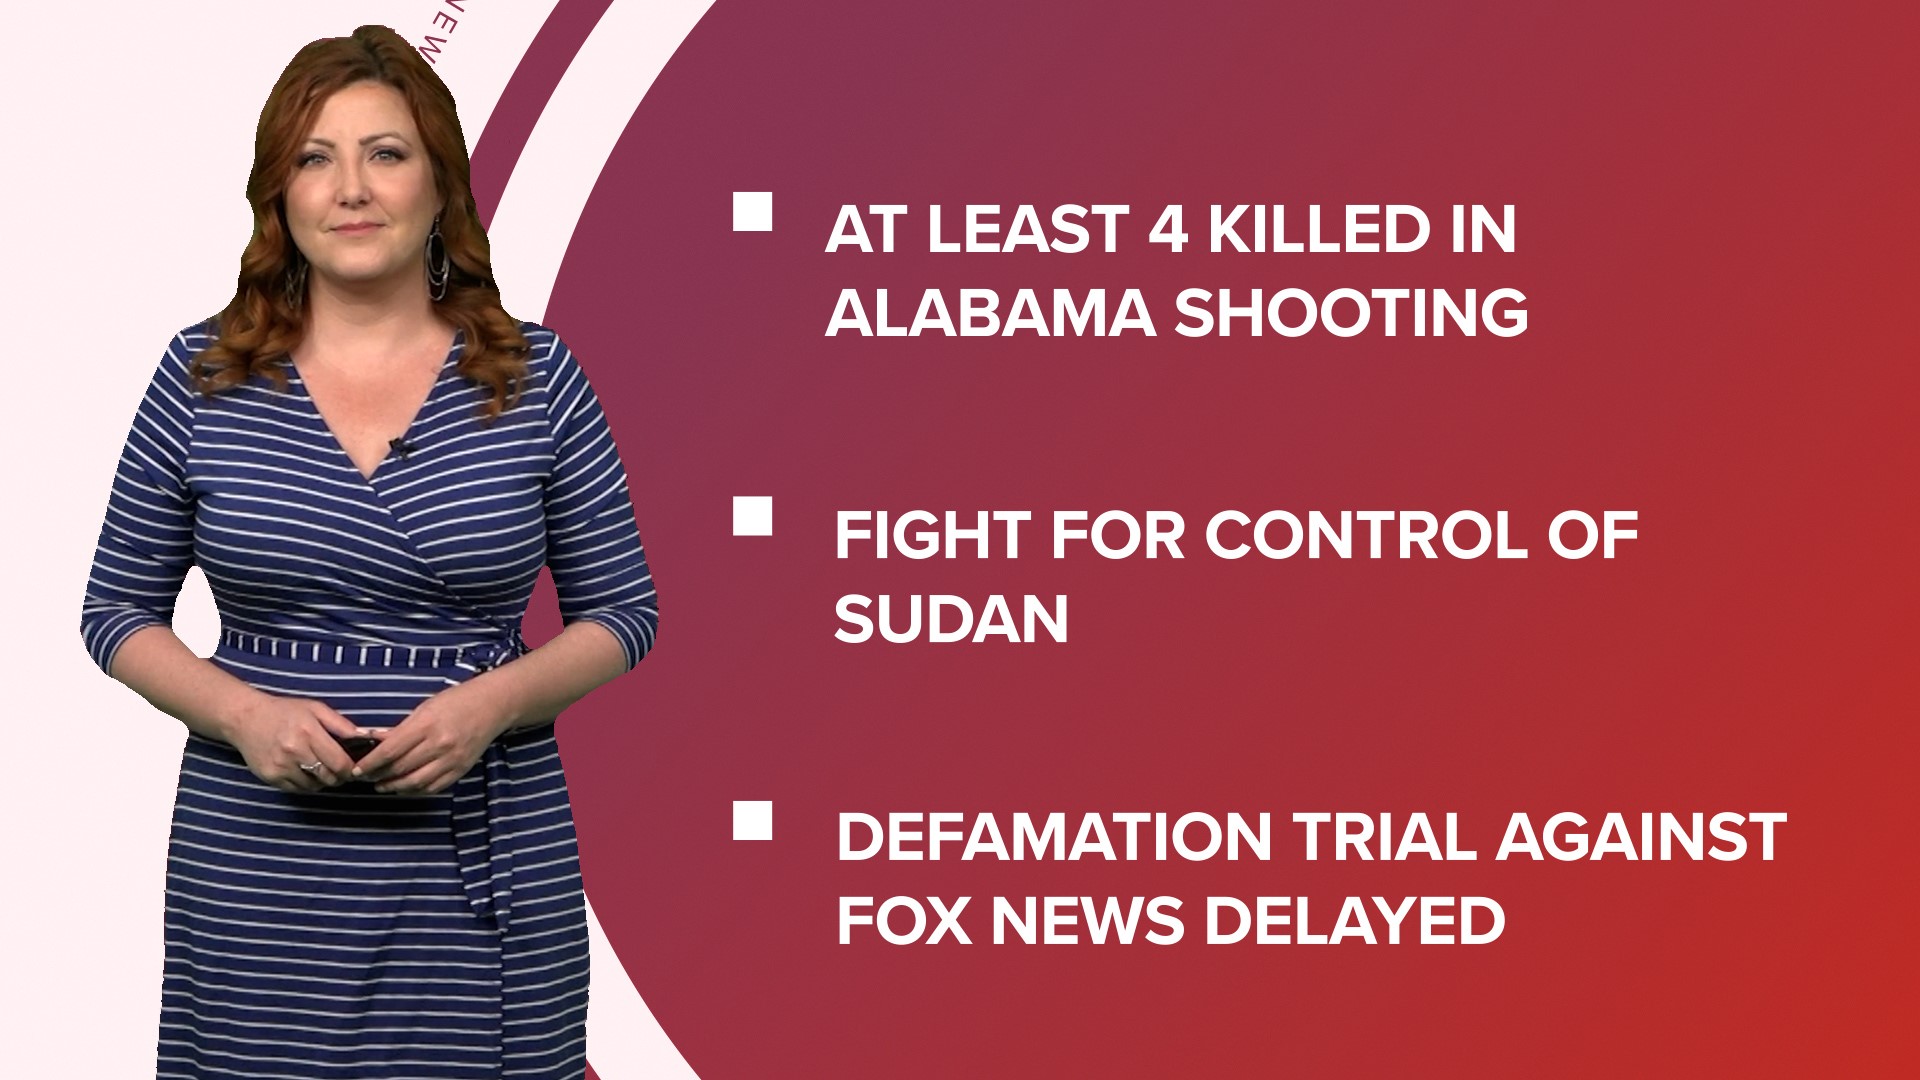 A look at what is happening in the news from deadly shooting in Alabama and Louisville to tomorrow's tax deadline and the end of "Phantom of the Opera" on Broadway.